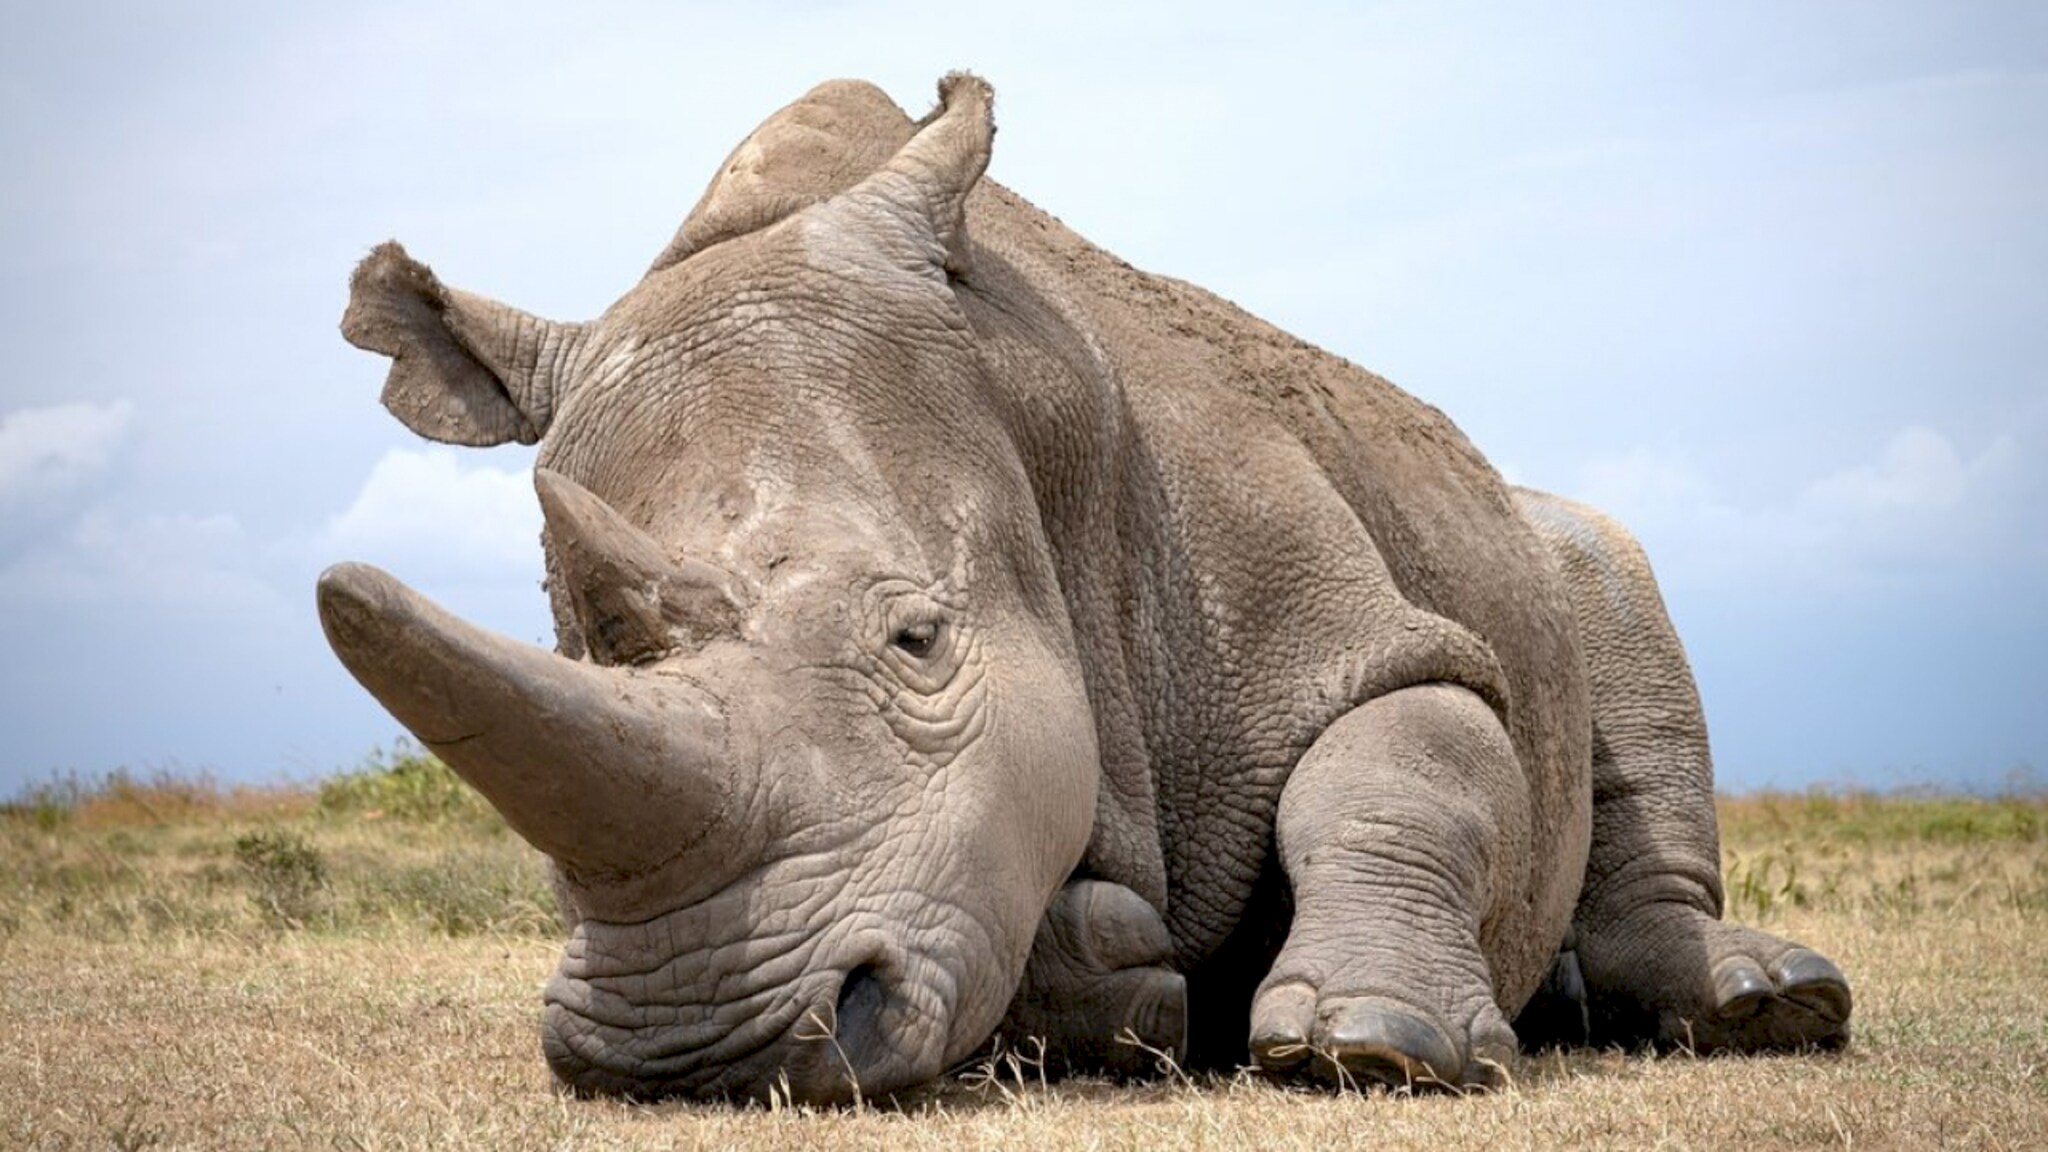 After that, only the white rhino was left for the breeding program